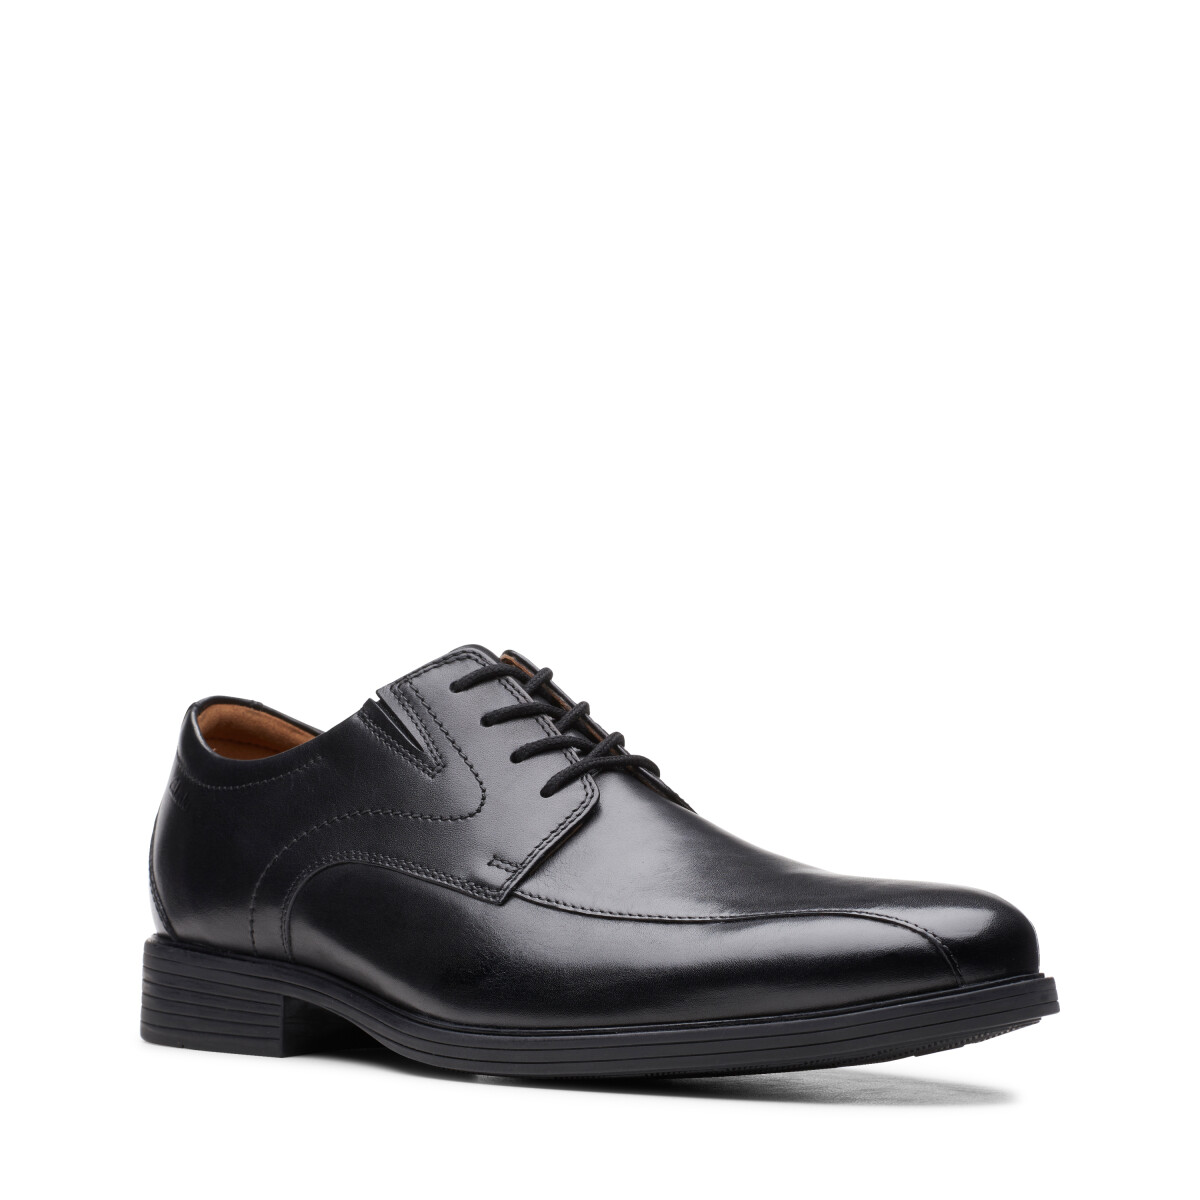 Whiddon Pace Black Leather Clarks - Black 